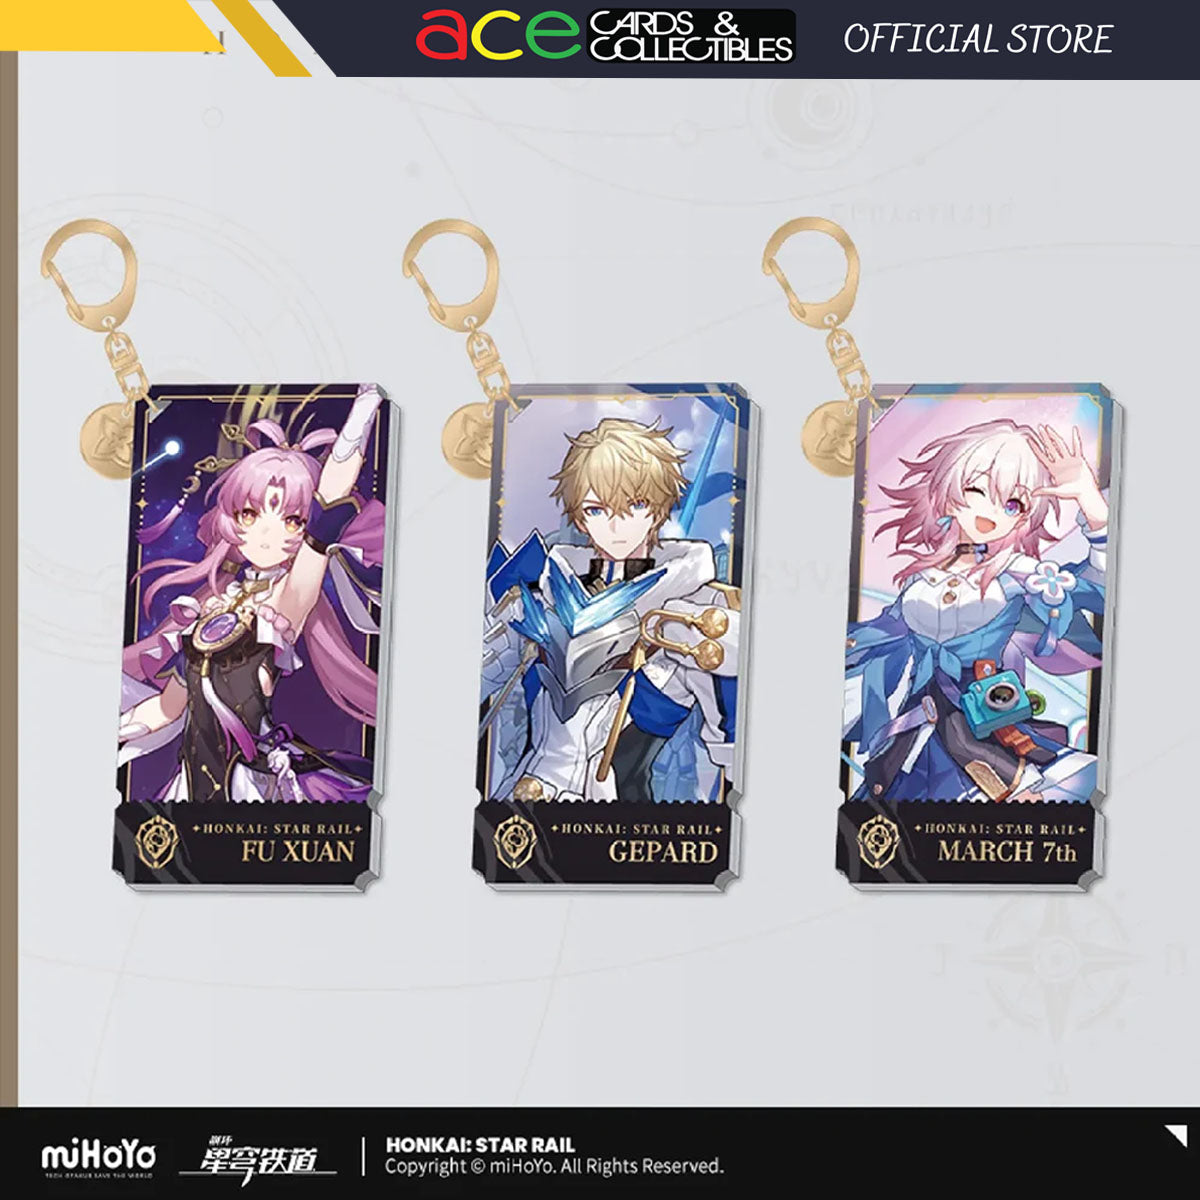 Honkai: Star Rail Character Keychain "The Preservation"-Fu Xuan-miHoYo-Ace Cards & Collectibles